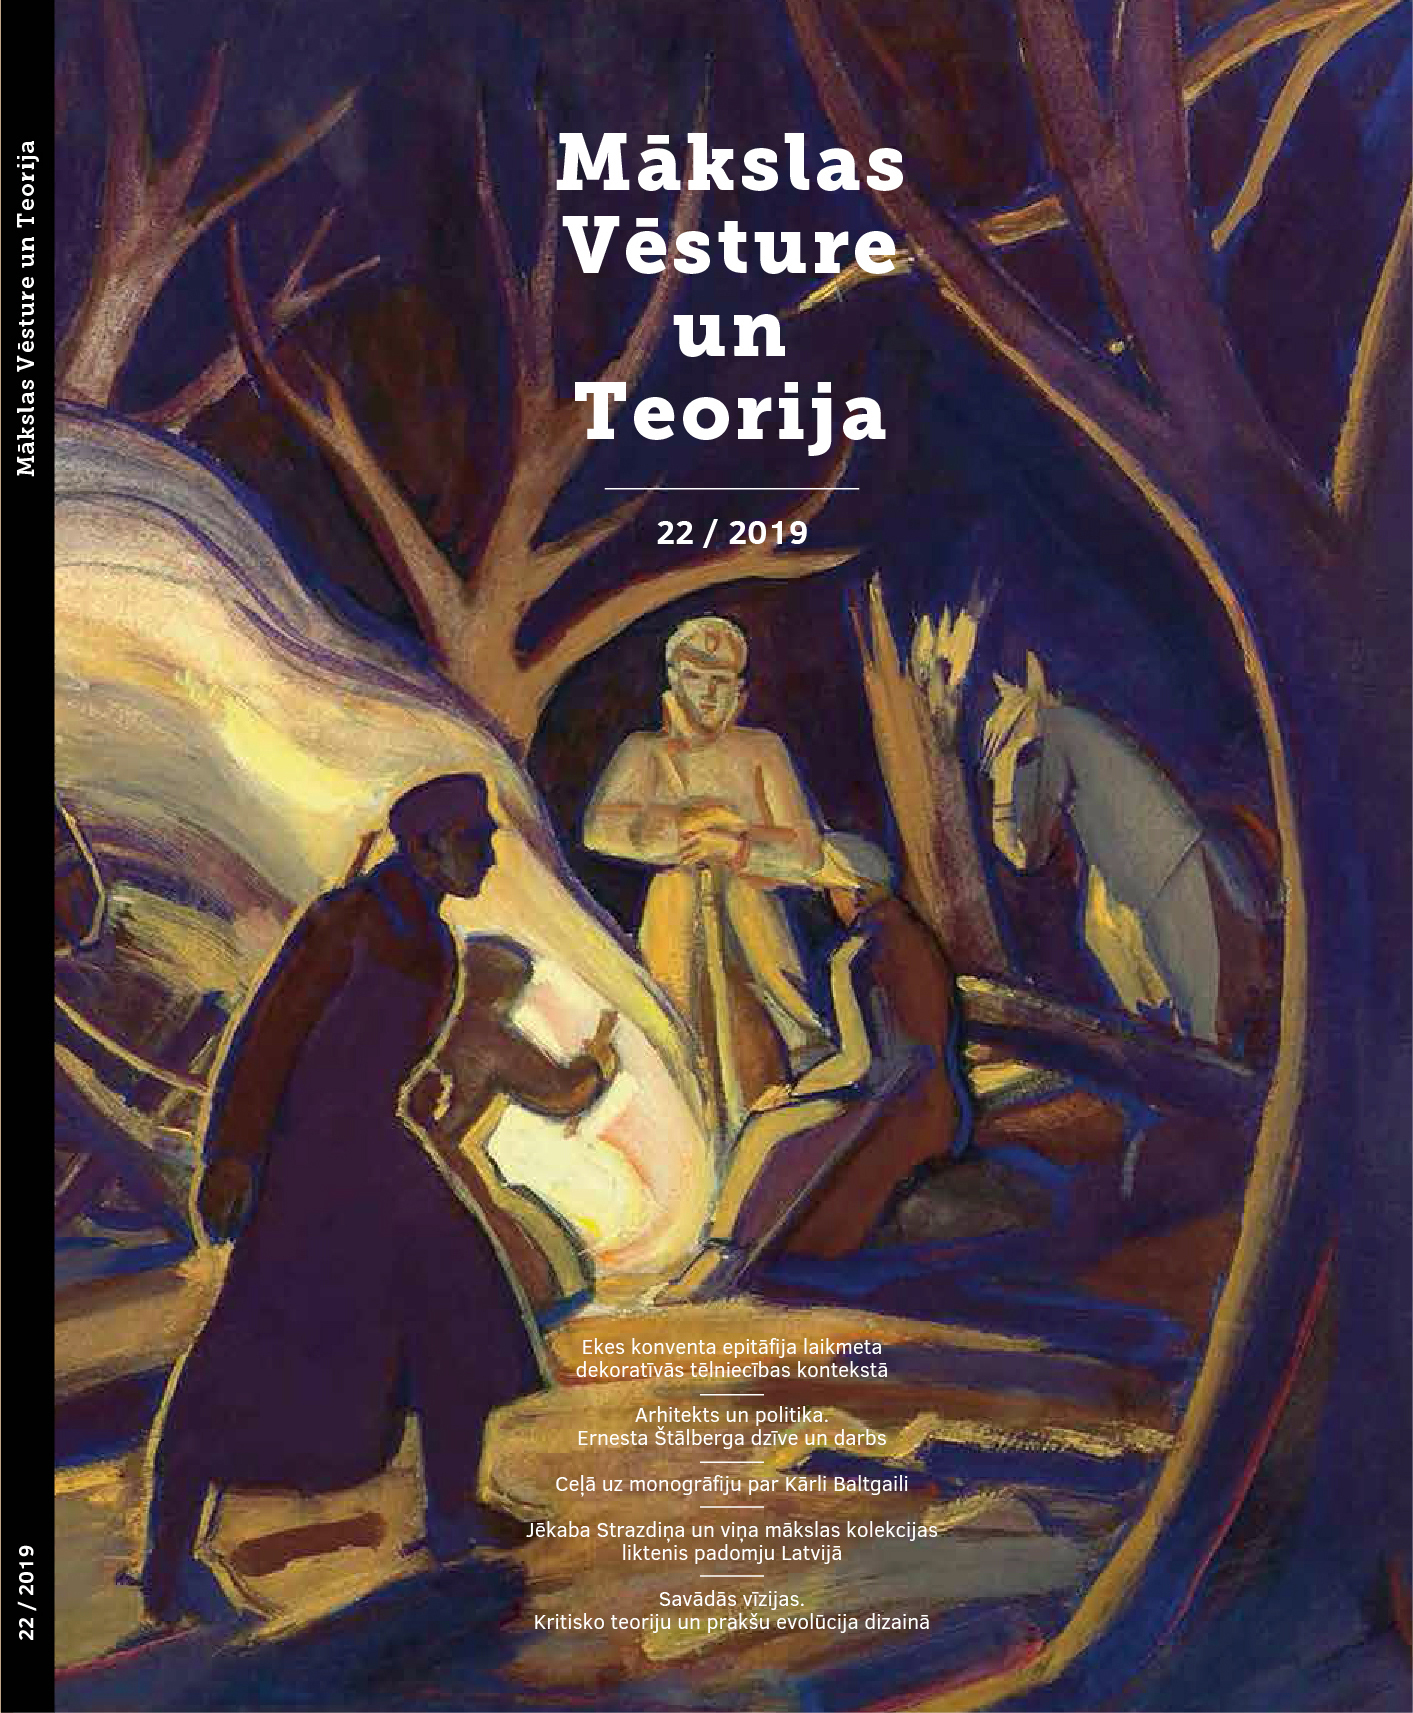 Strange Visions.
Evolution of Critical Theories and Practices in Design Cover Image